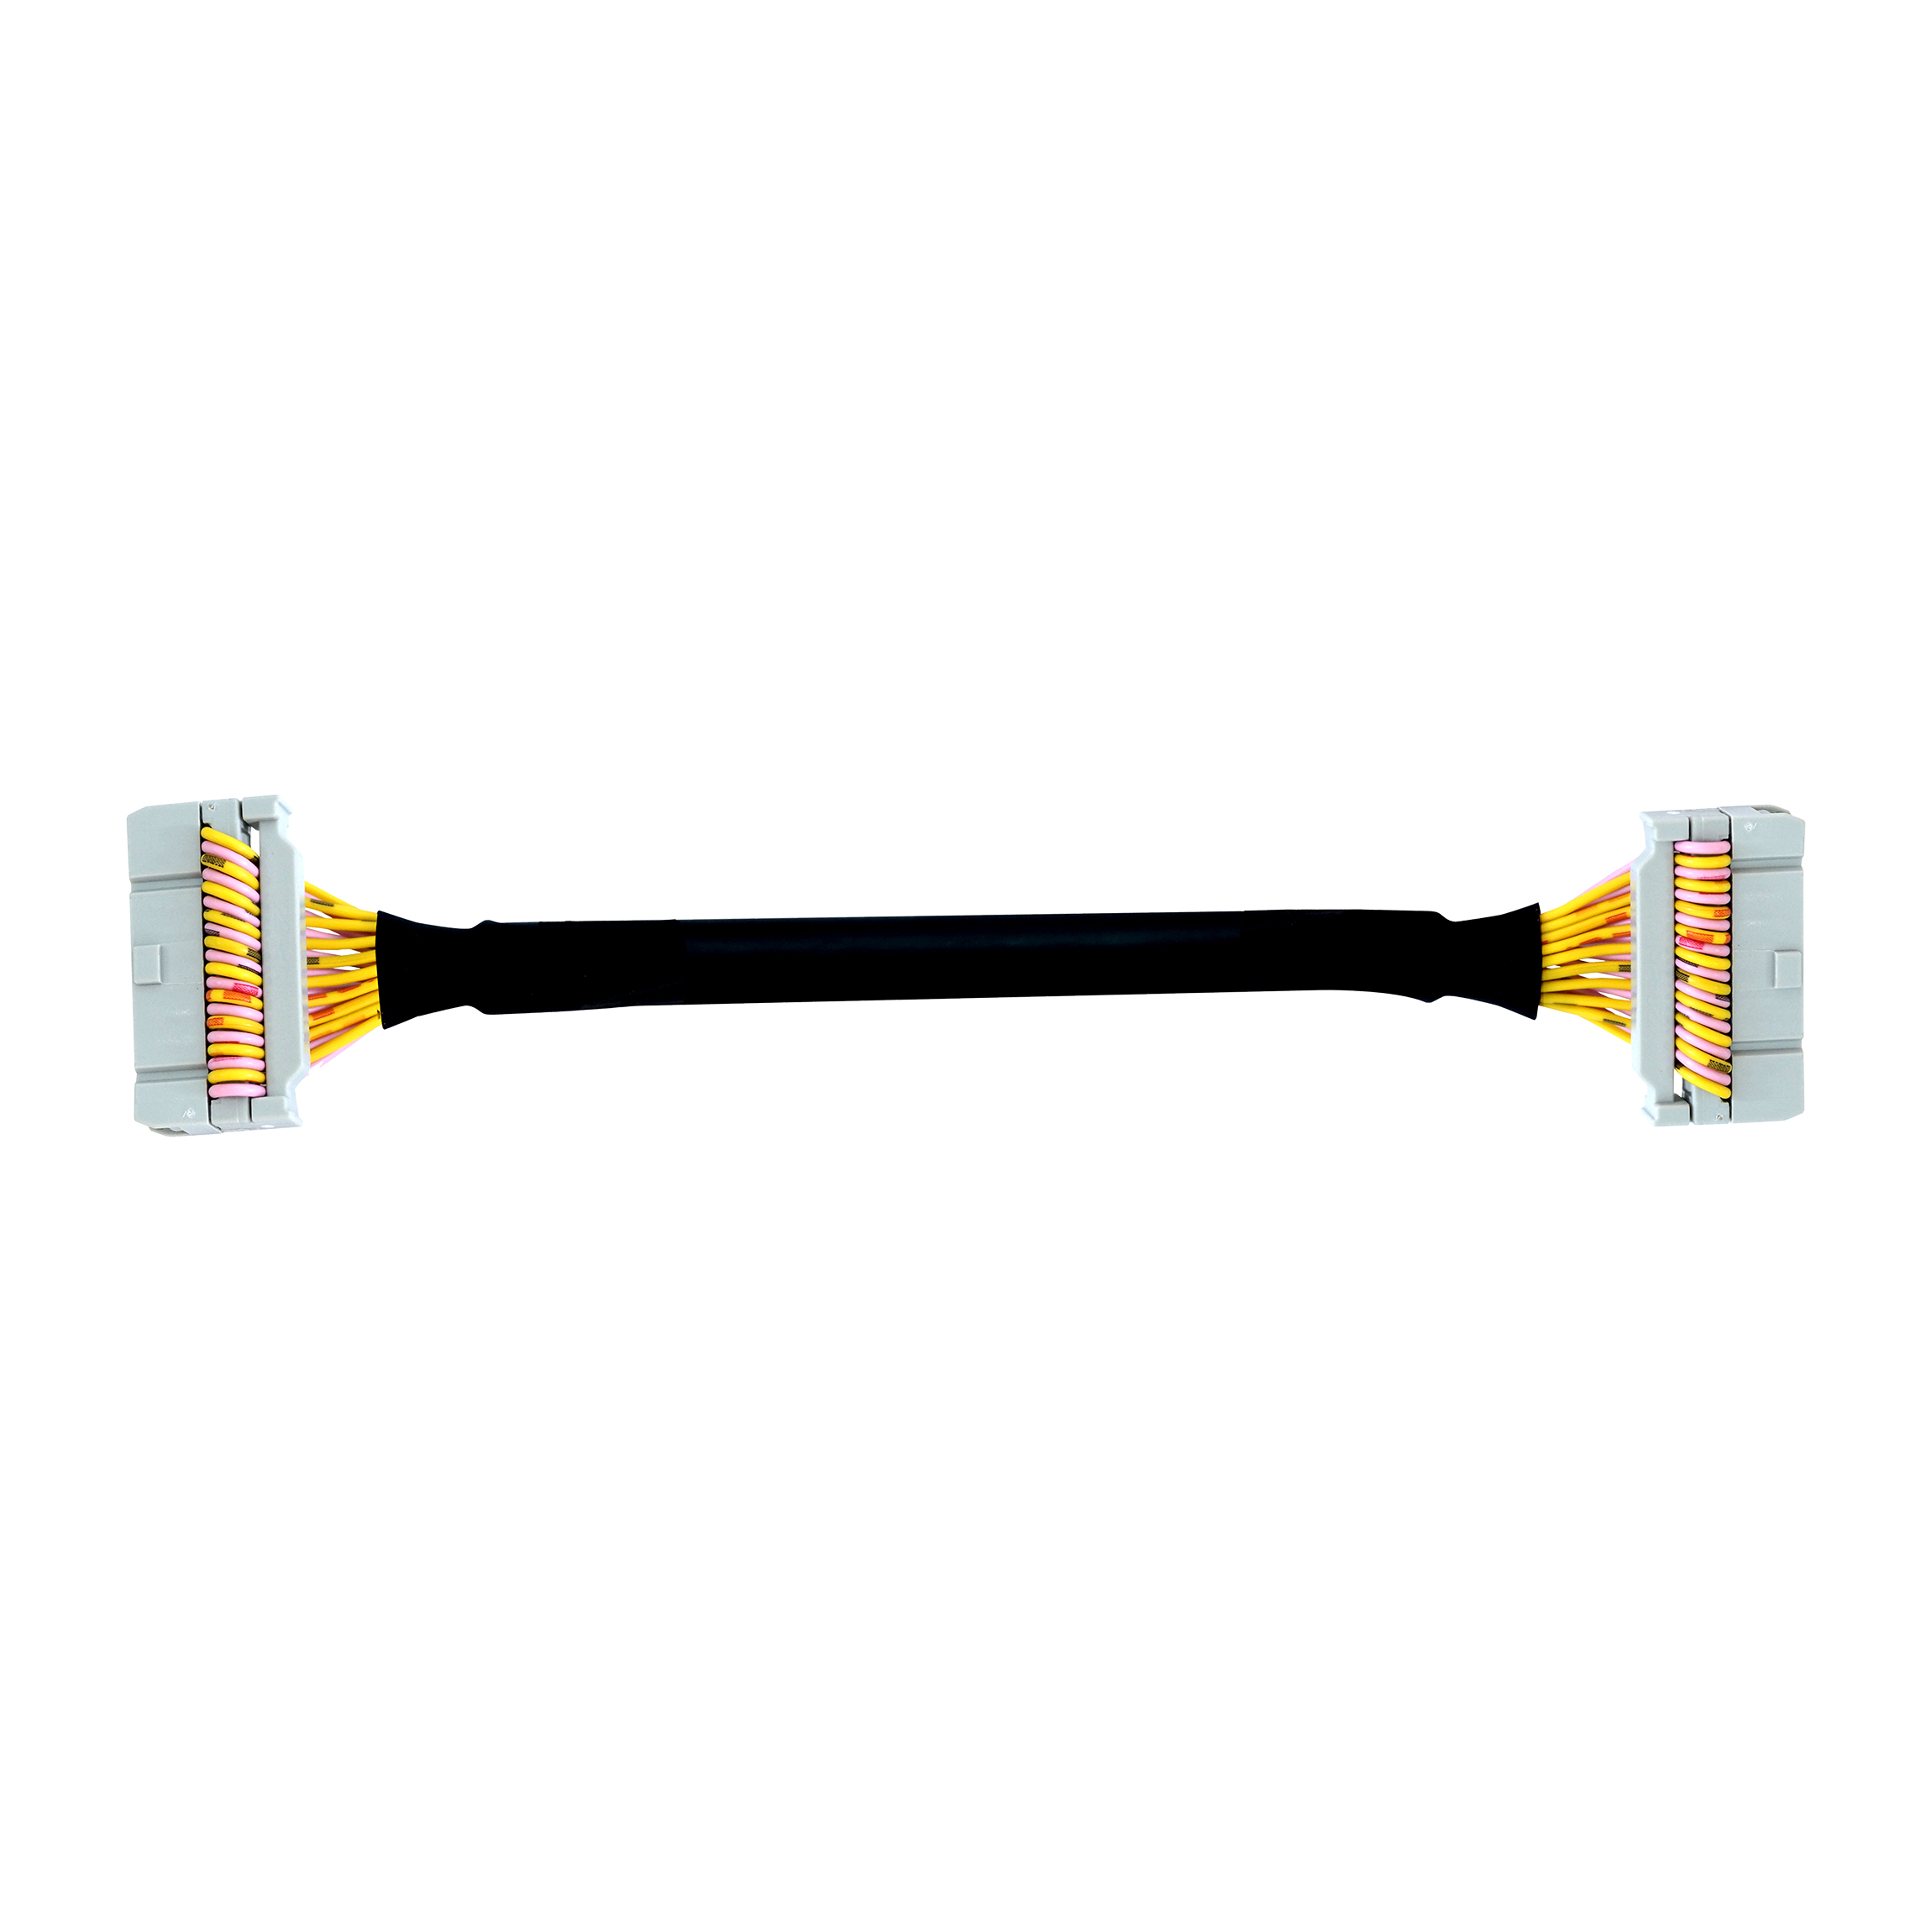 Products|Assembly Cable CJ1-M_M-20C